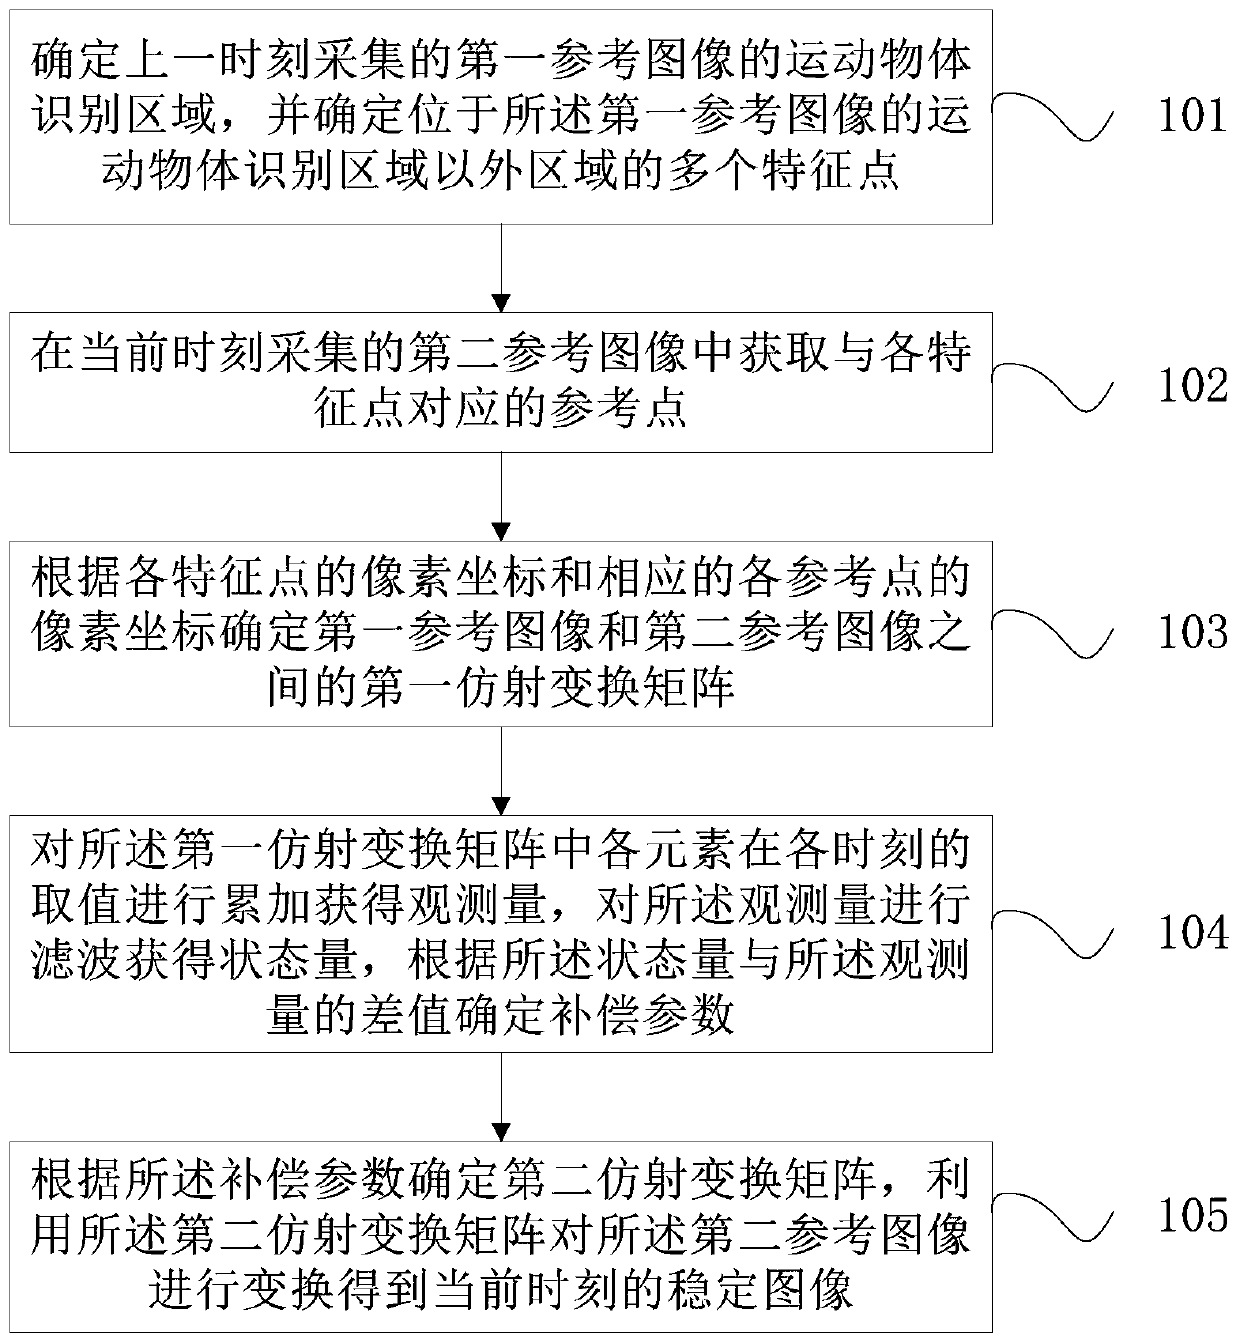 Electronic image stabilization method and device for vehicle-mounted camera and readable storage medium